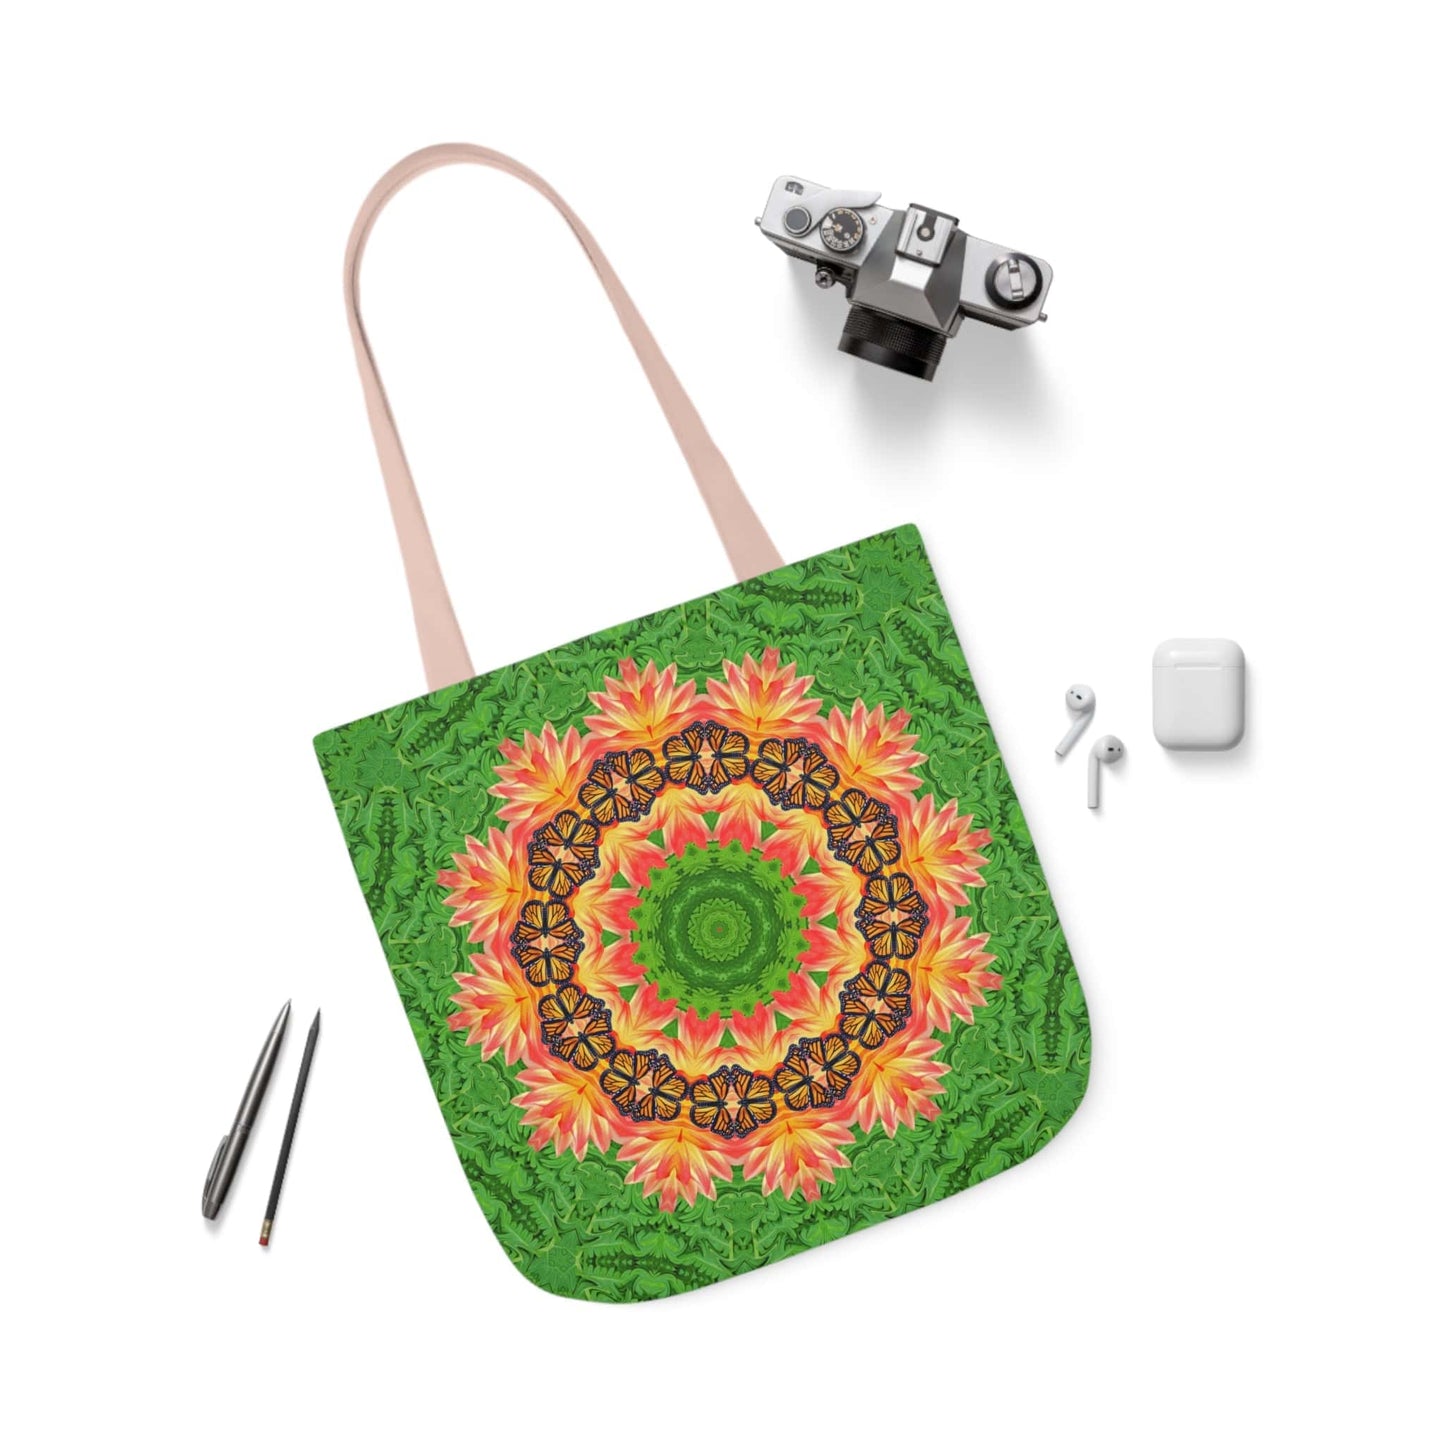 Monarch Butterfly Floral Mandala Tote Bag - Cute and Practical Everyday Accessory pink handle